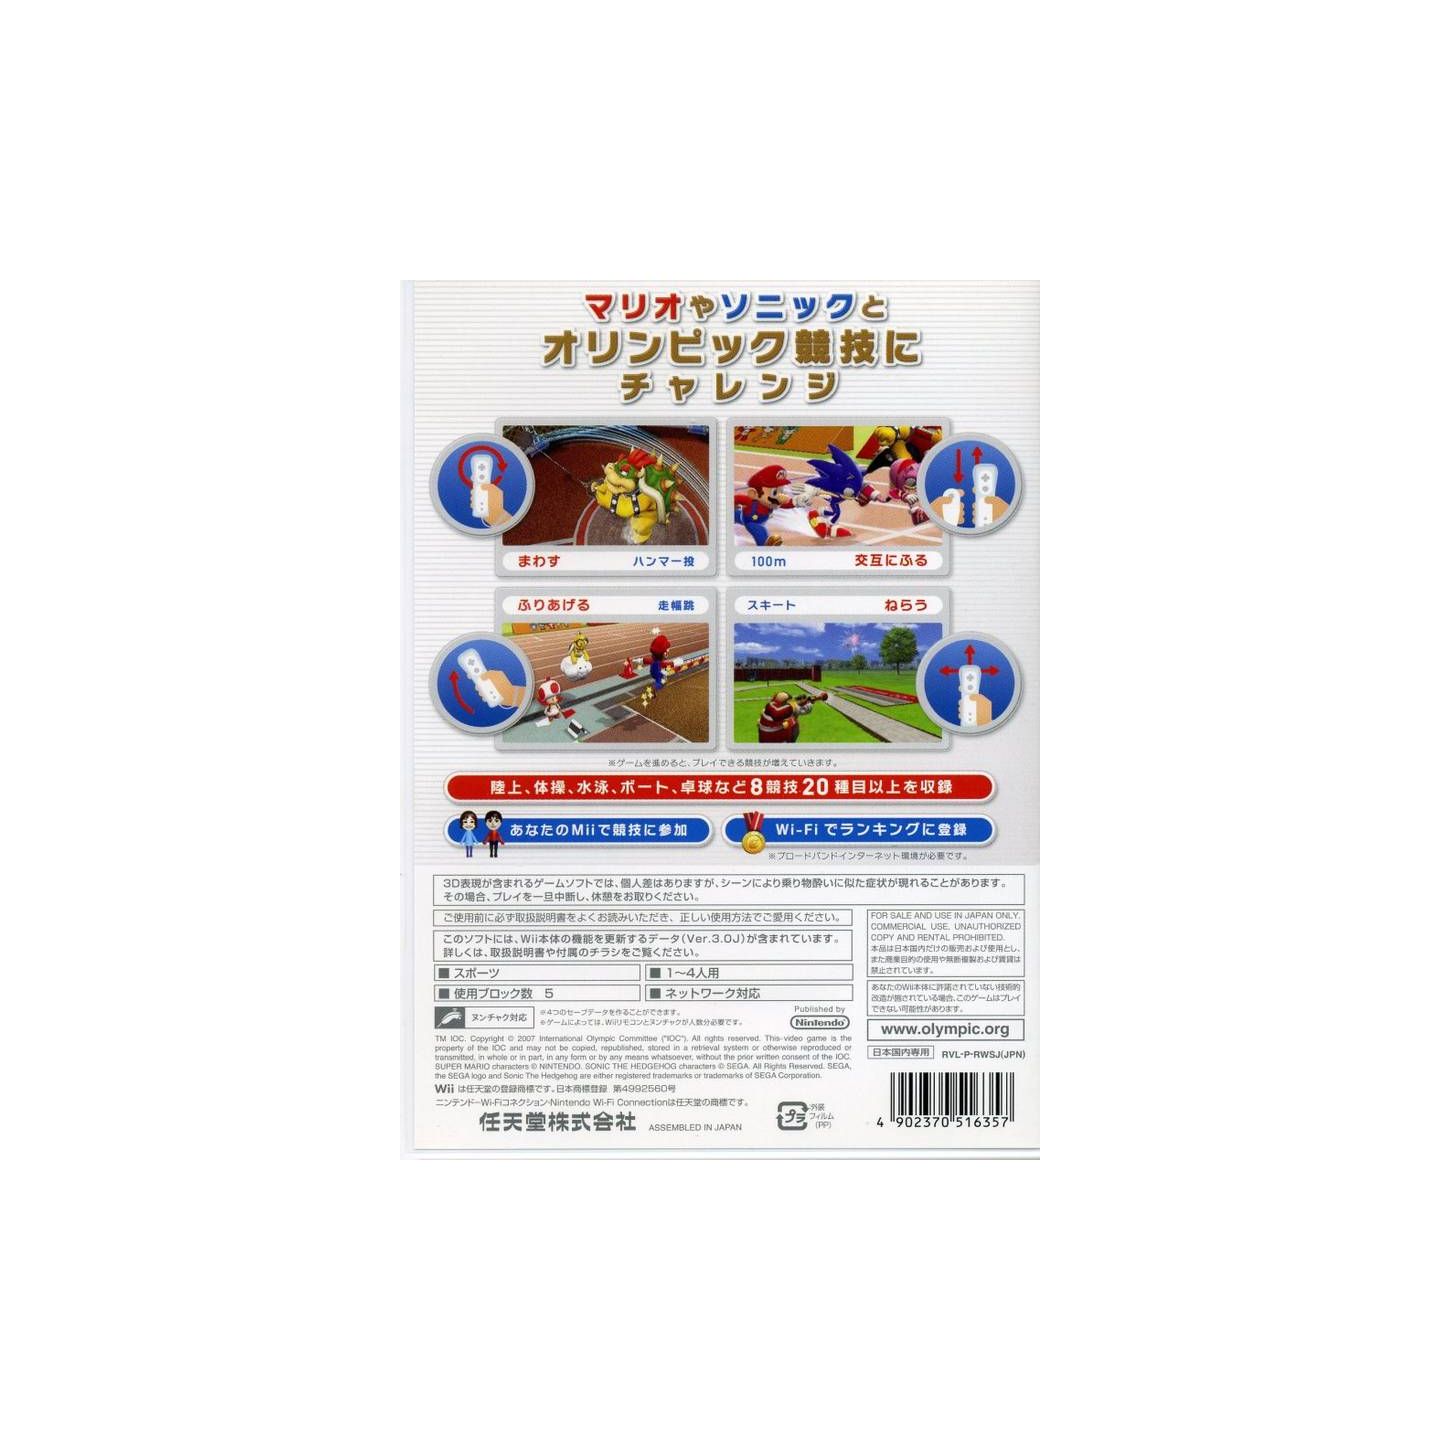 Rent Mario & Sonic at the Olympic Games on Nintendo DS